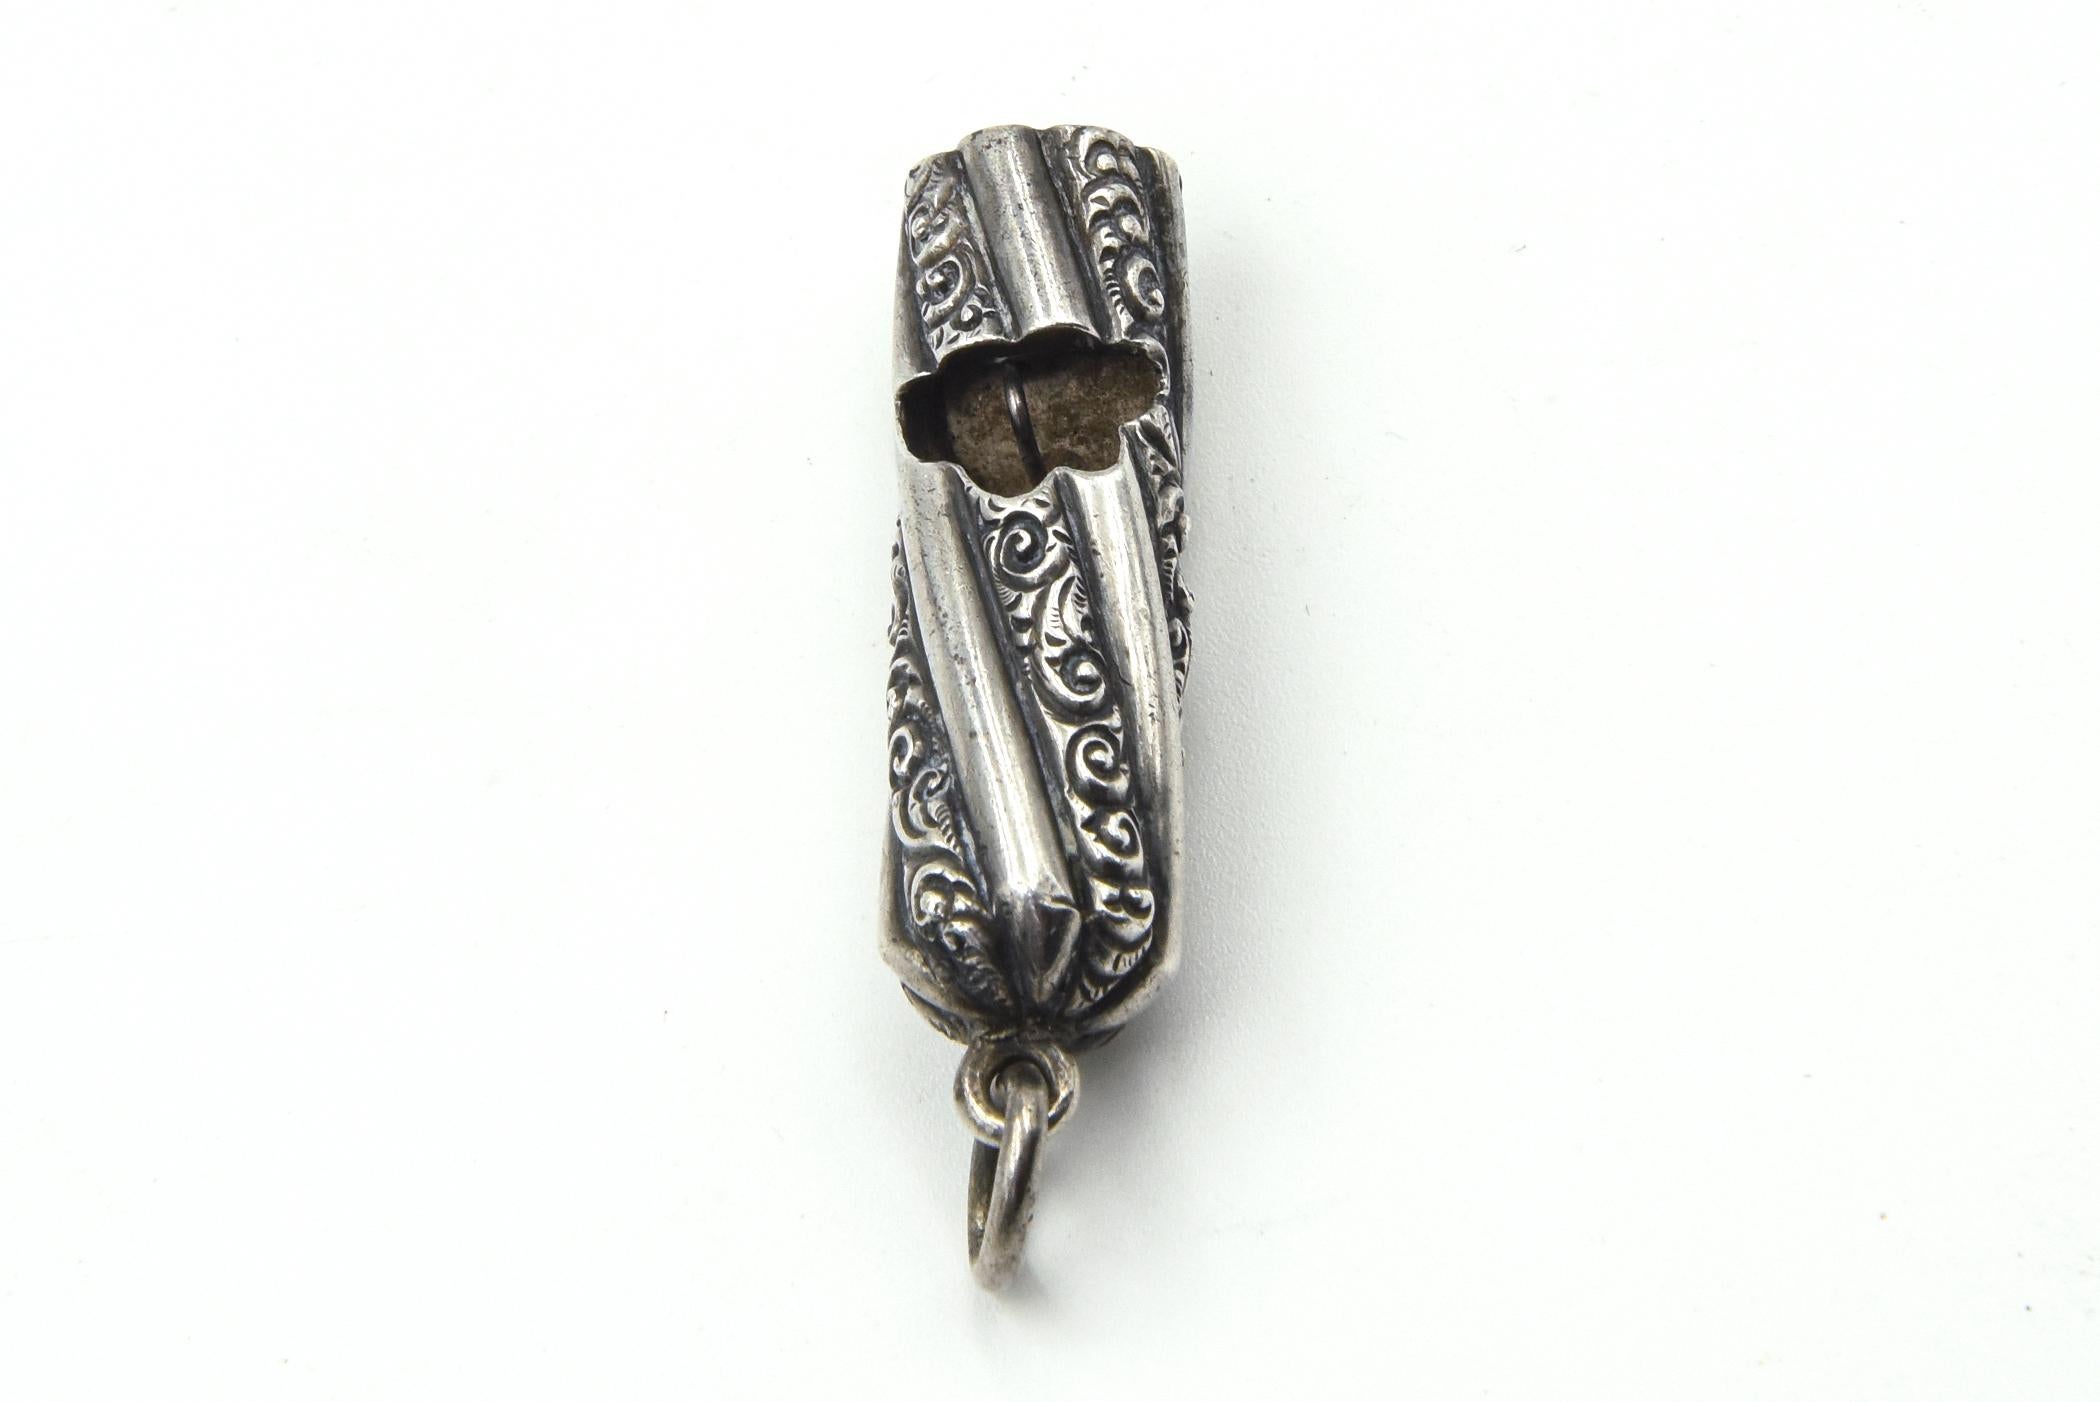 Antique Victorian Engraved Sterling Silver Whistle Charm Pendant 2